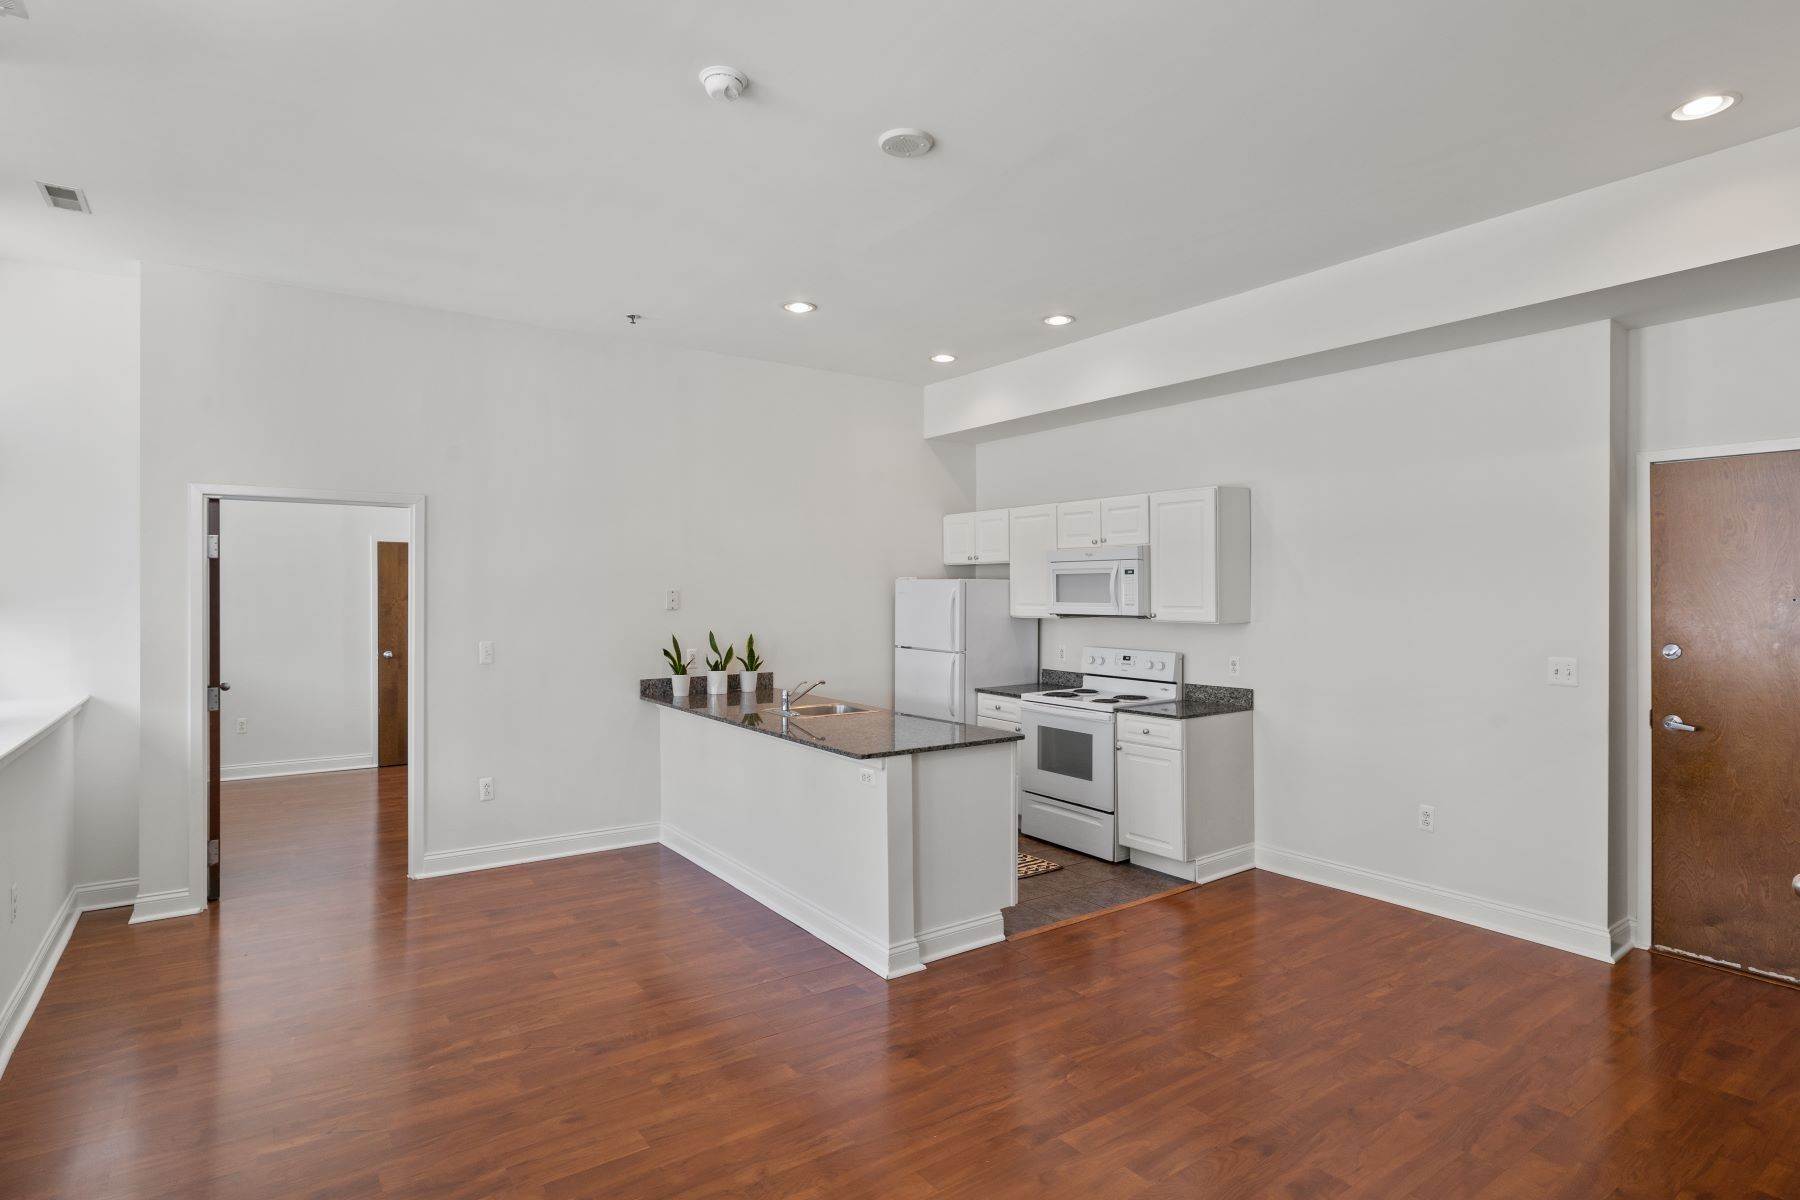 13. Condominiums for Sale at 1001-13 Chestnut Street, Philadelphia, PA 19107 1001-13 Chestnut Street, #603E Philadelphia, Pennsylvania 19107 United States